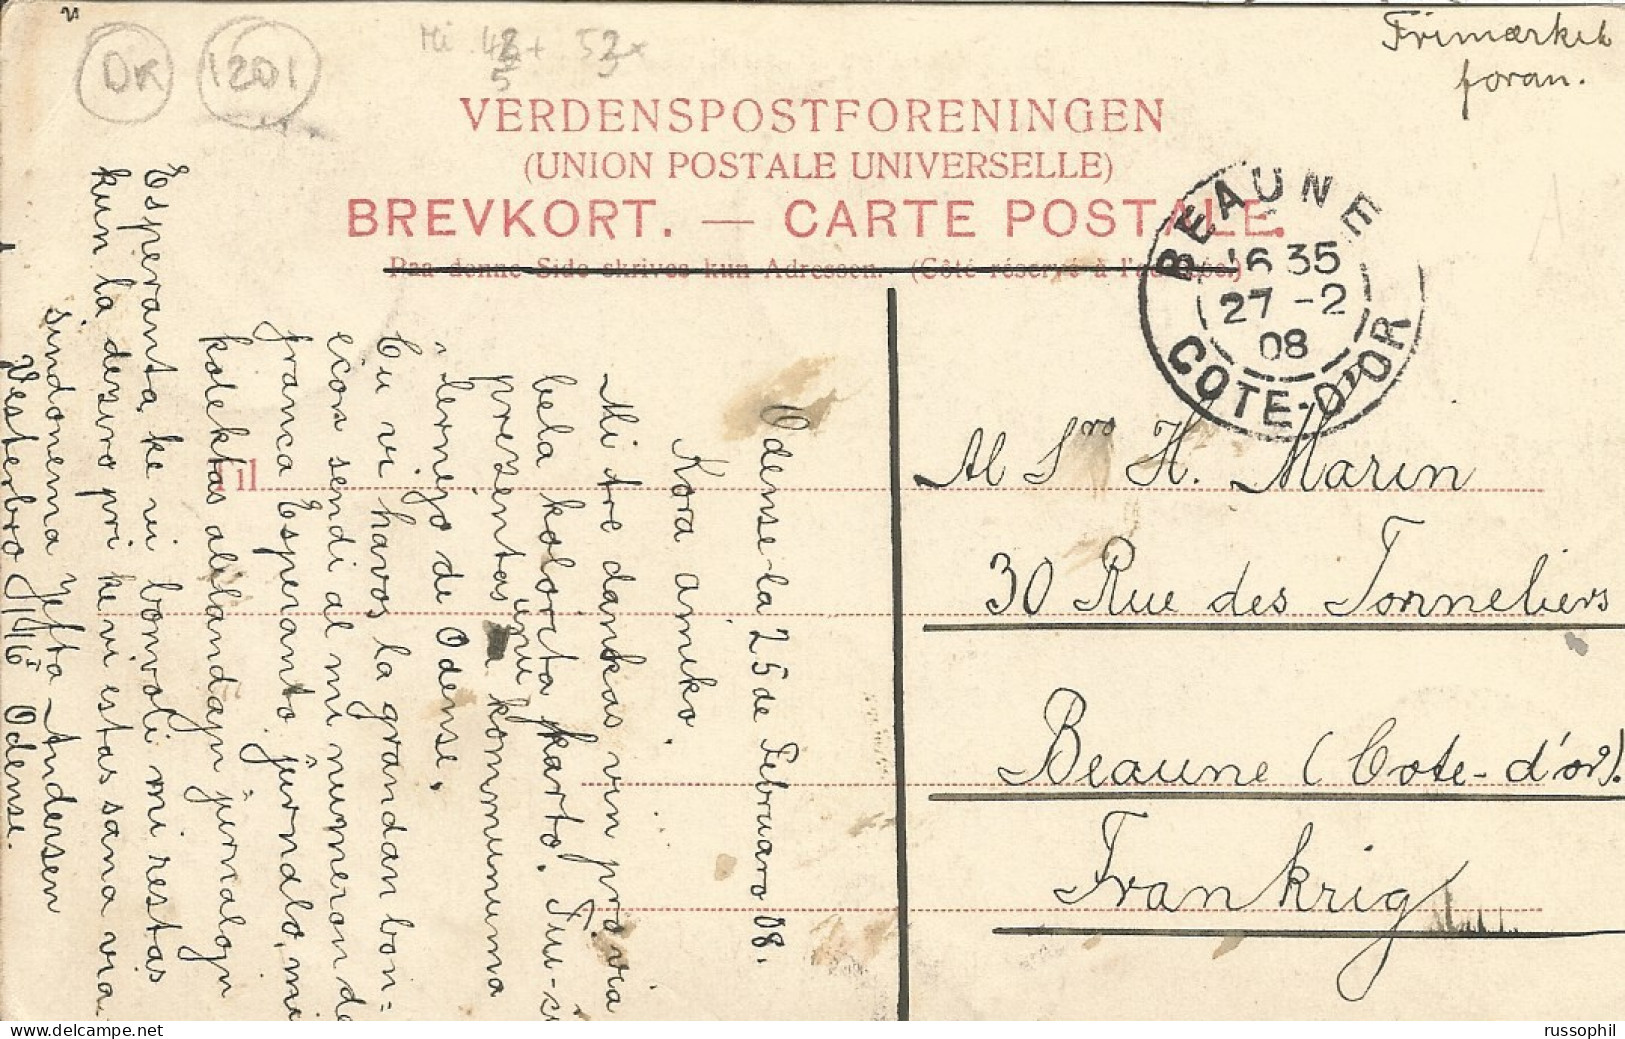 DENMARK - SPECTACULAR 6 STAMP FRANKING (10 ORE) ON PC (VIEW OF ODENSEE) TO FRANCE - 1908 - Briefe U. Dokumente